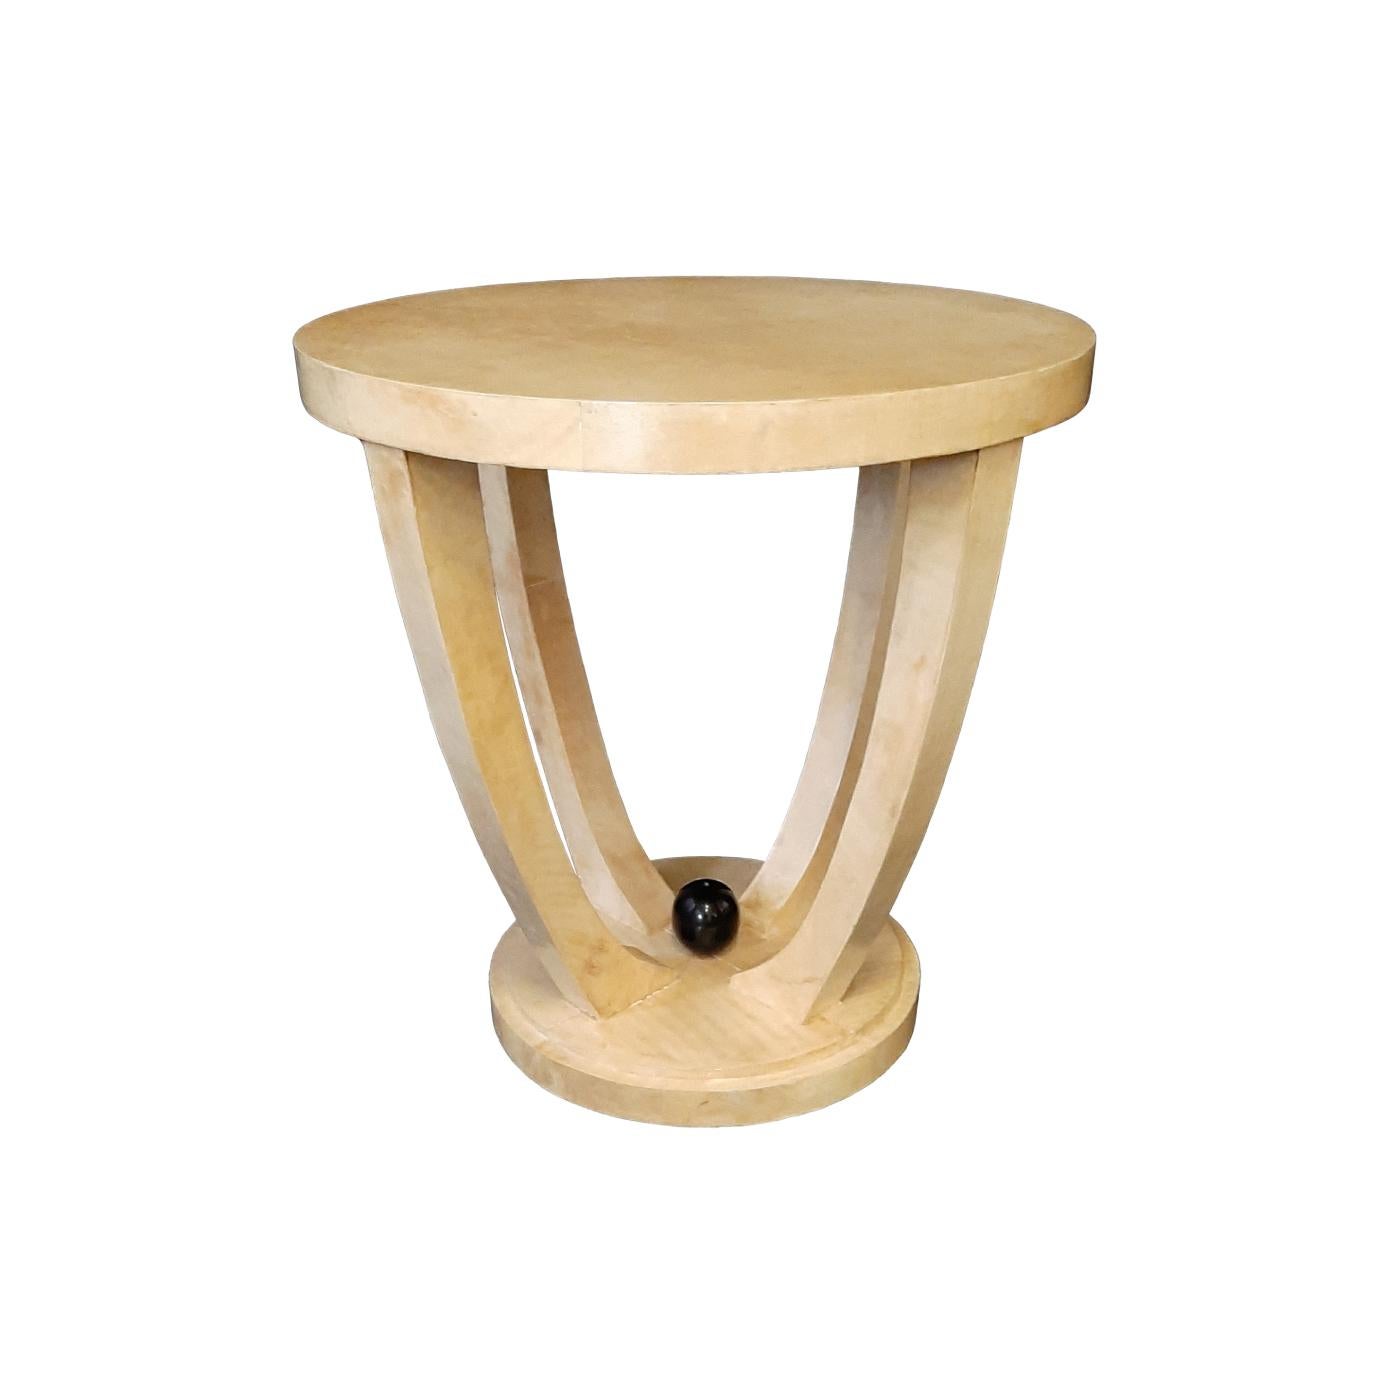 The singular aesthetic defining this round side table is thanks to its precious natural ivory parchment upholstery, which enables the piece to further upgrade its flair over time. Four legs curving outwards connect the base to the round top, the